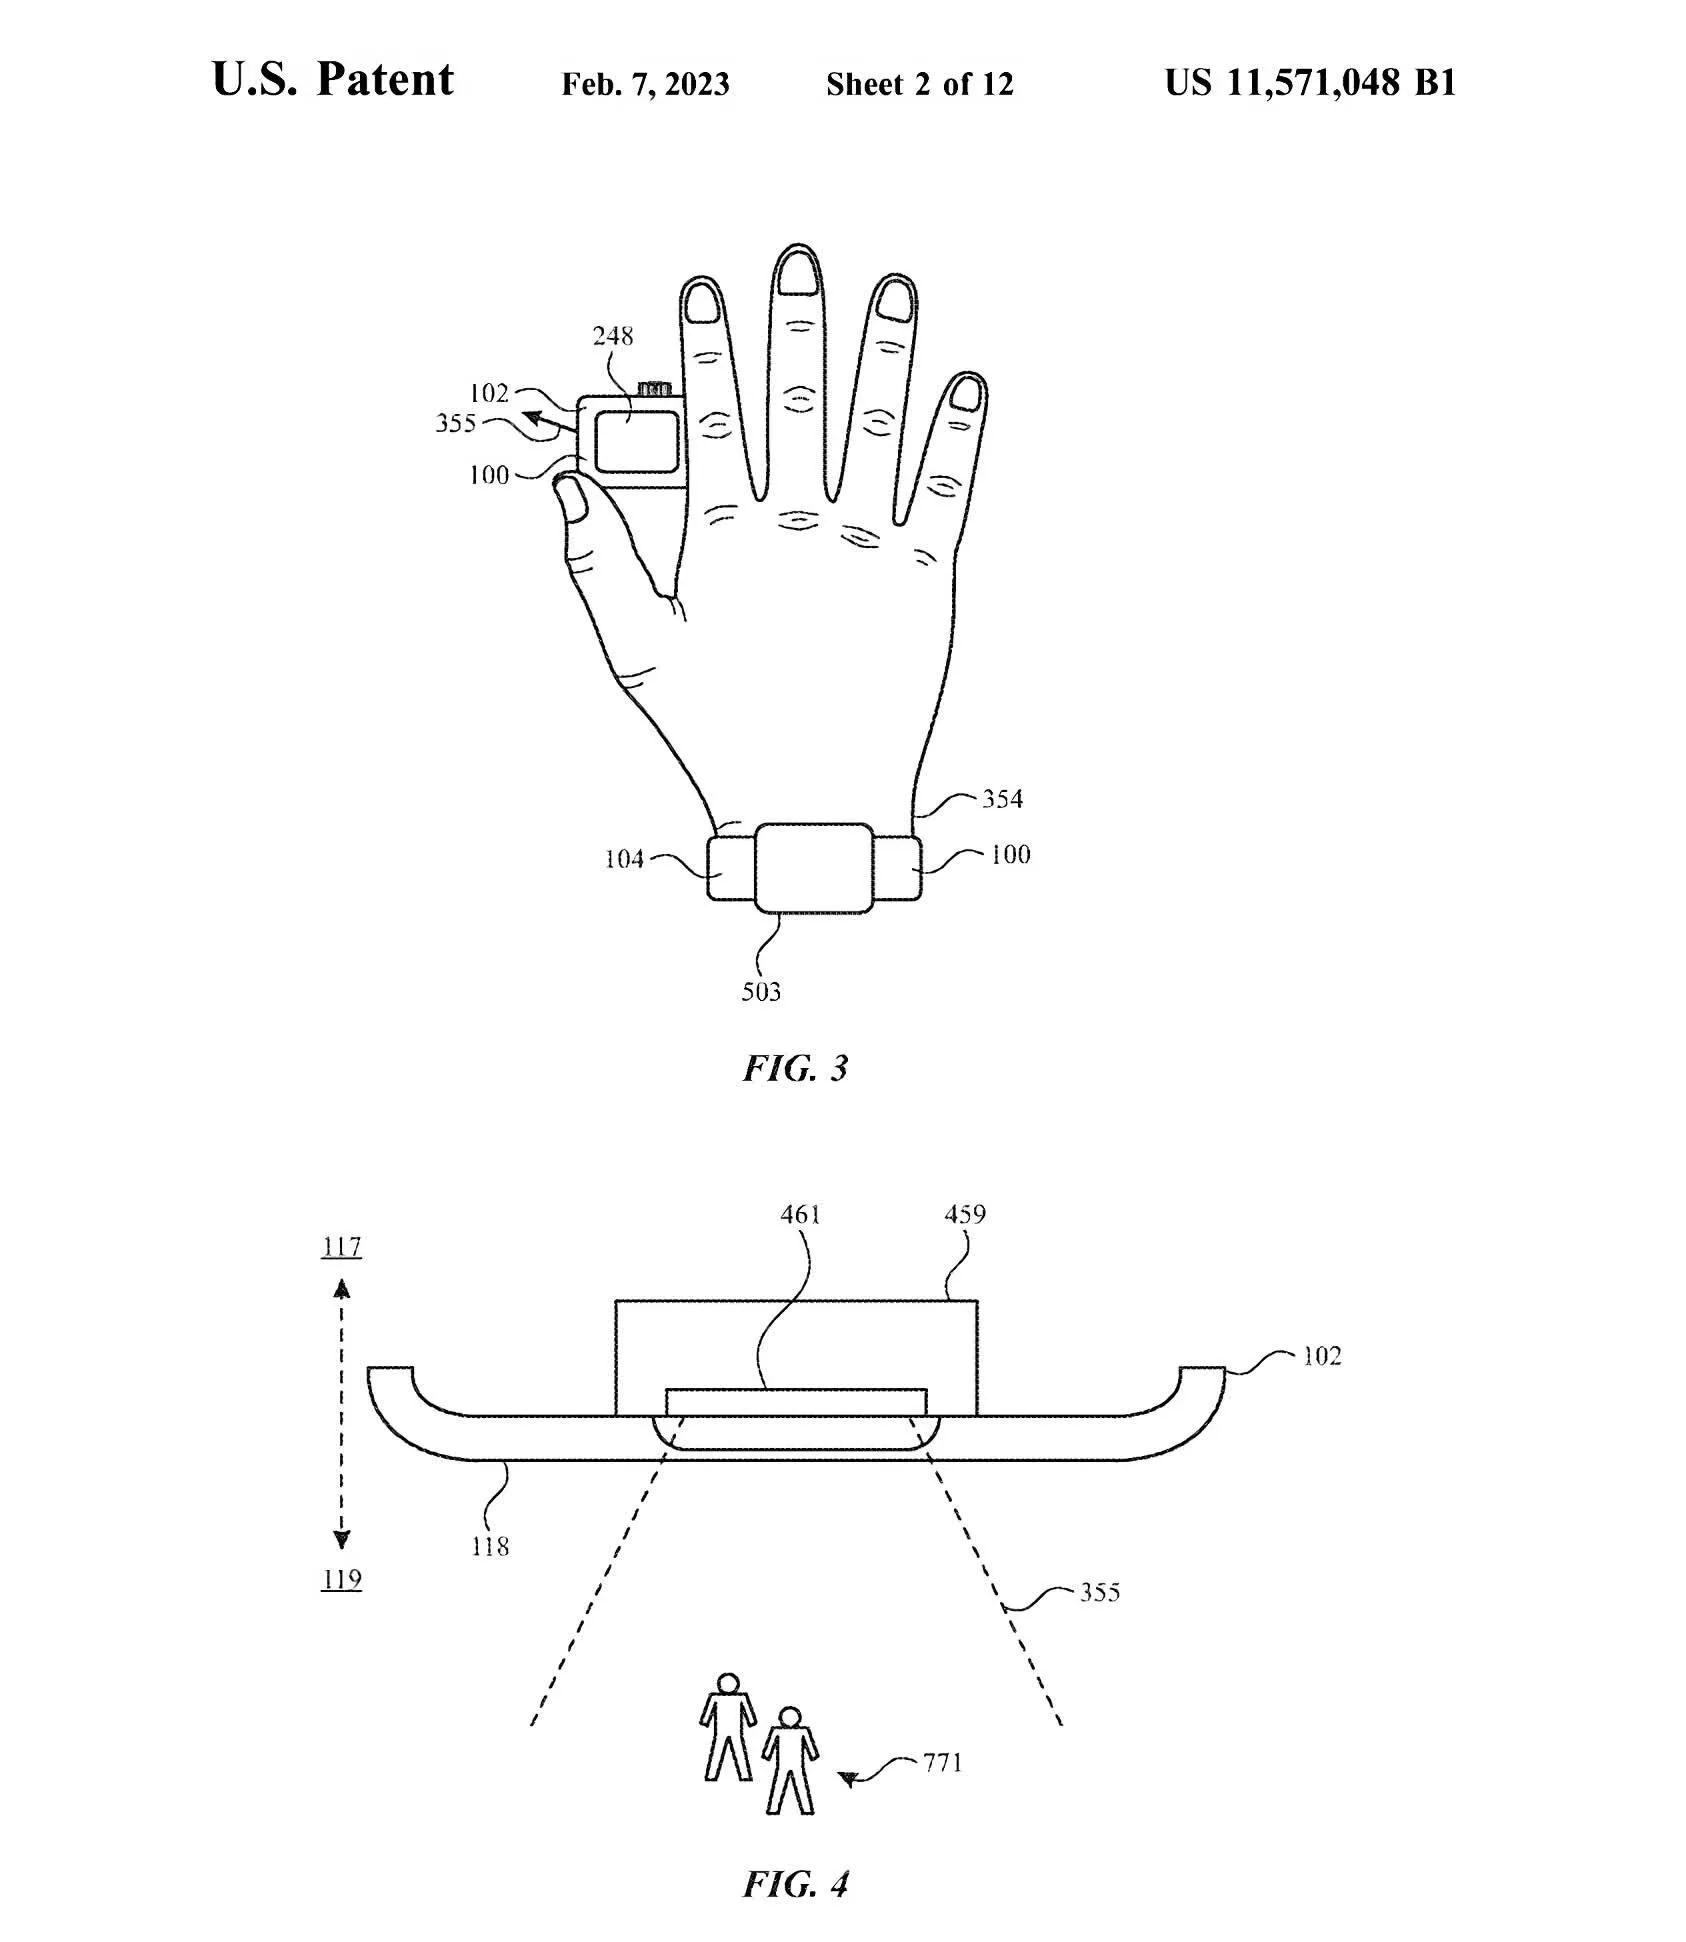 Apples newly filed patent suggests the Apple Watch will include a camera1